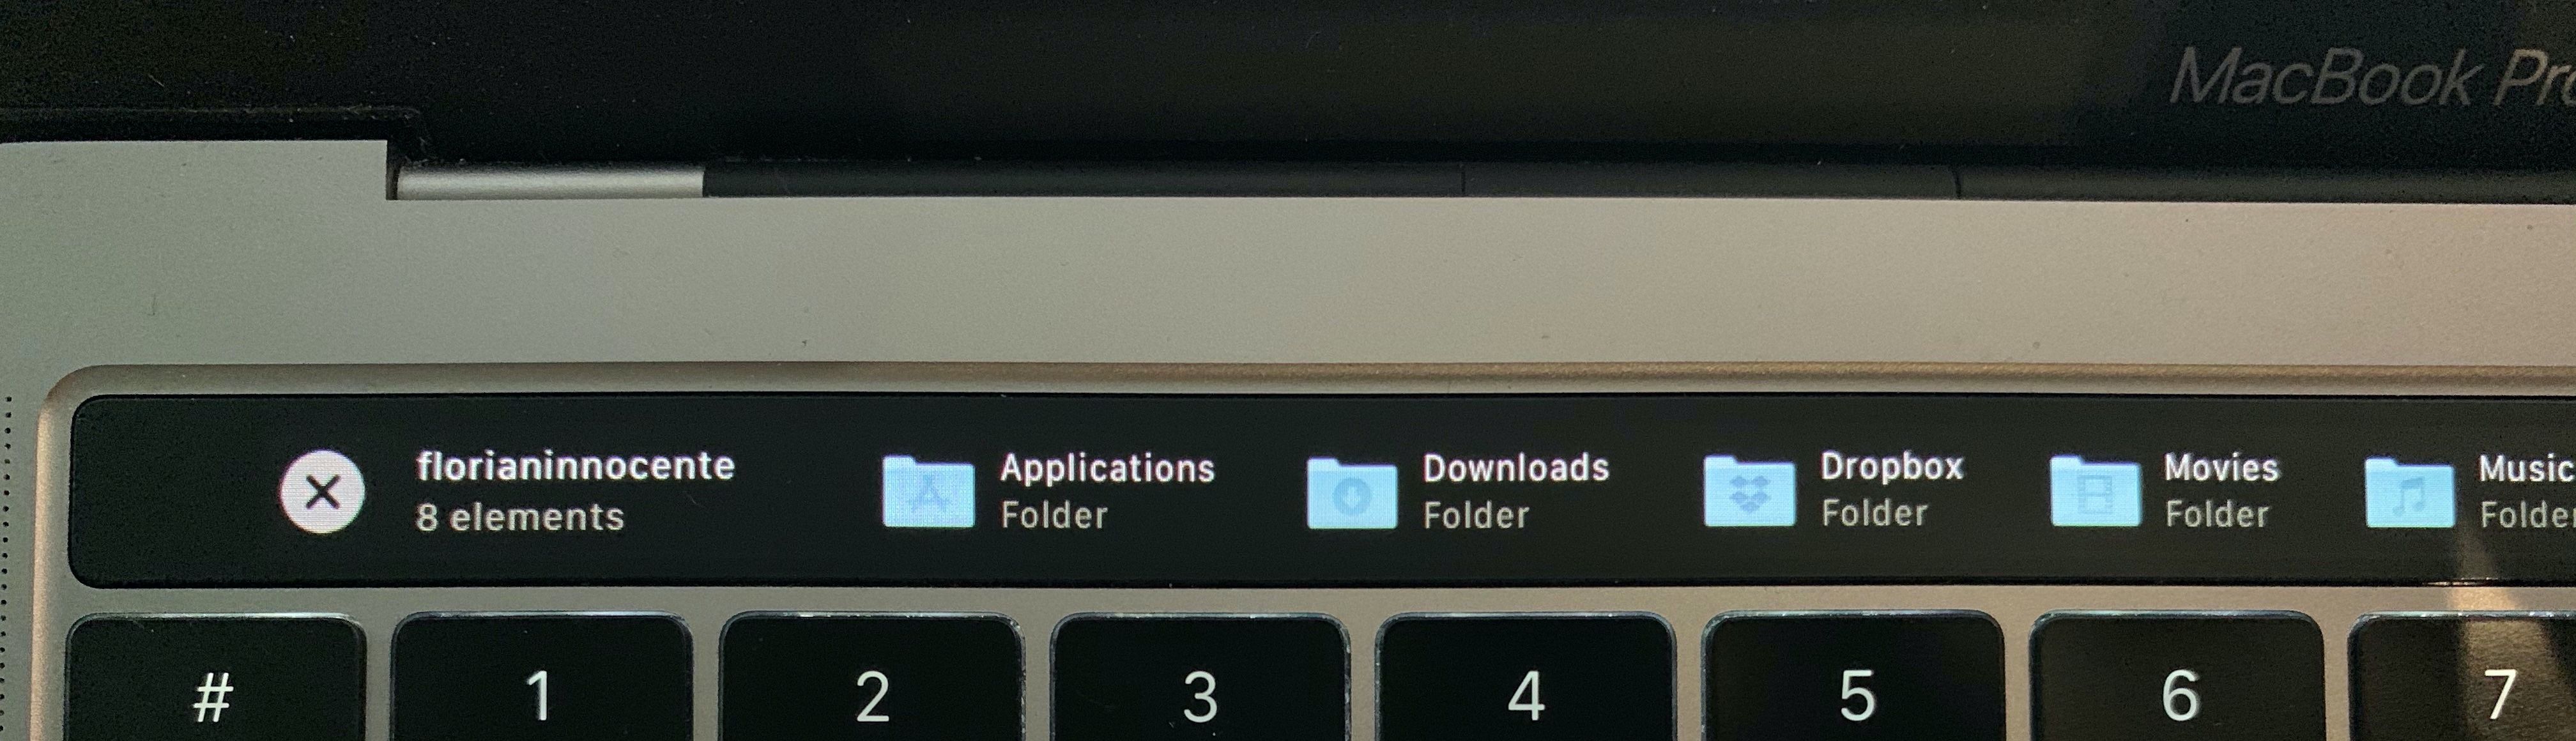 pock touch bar